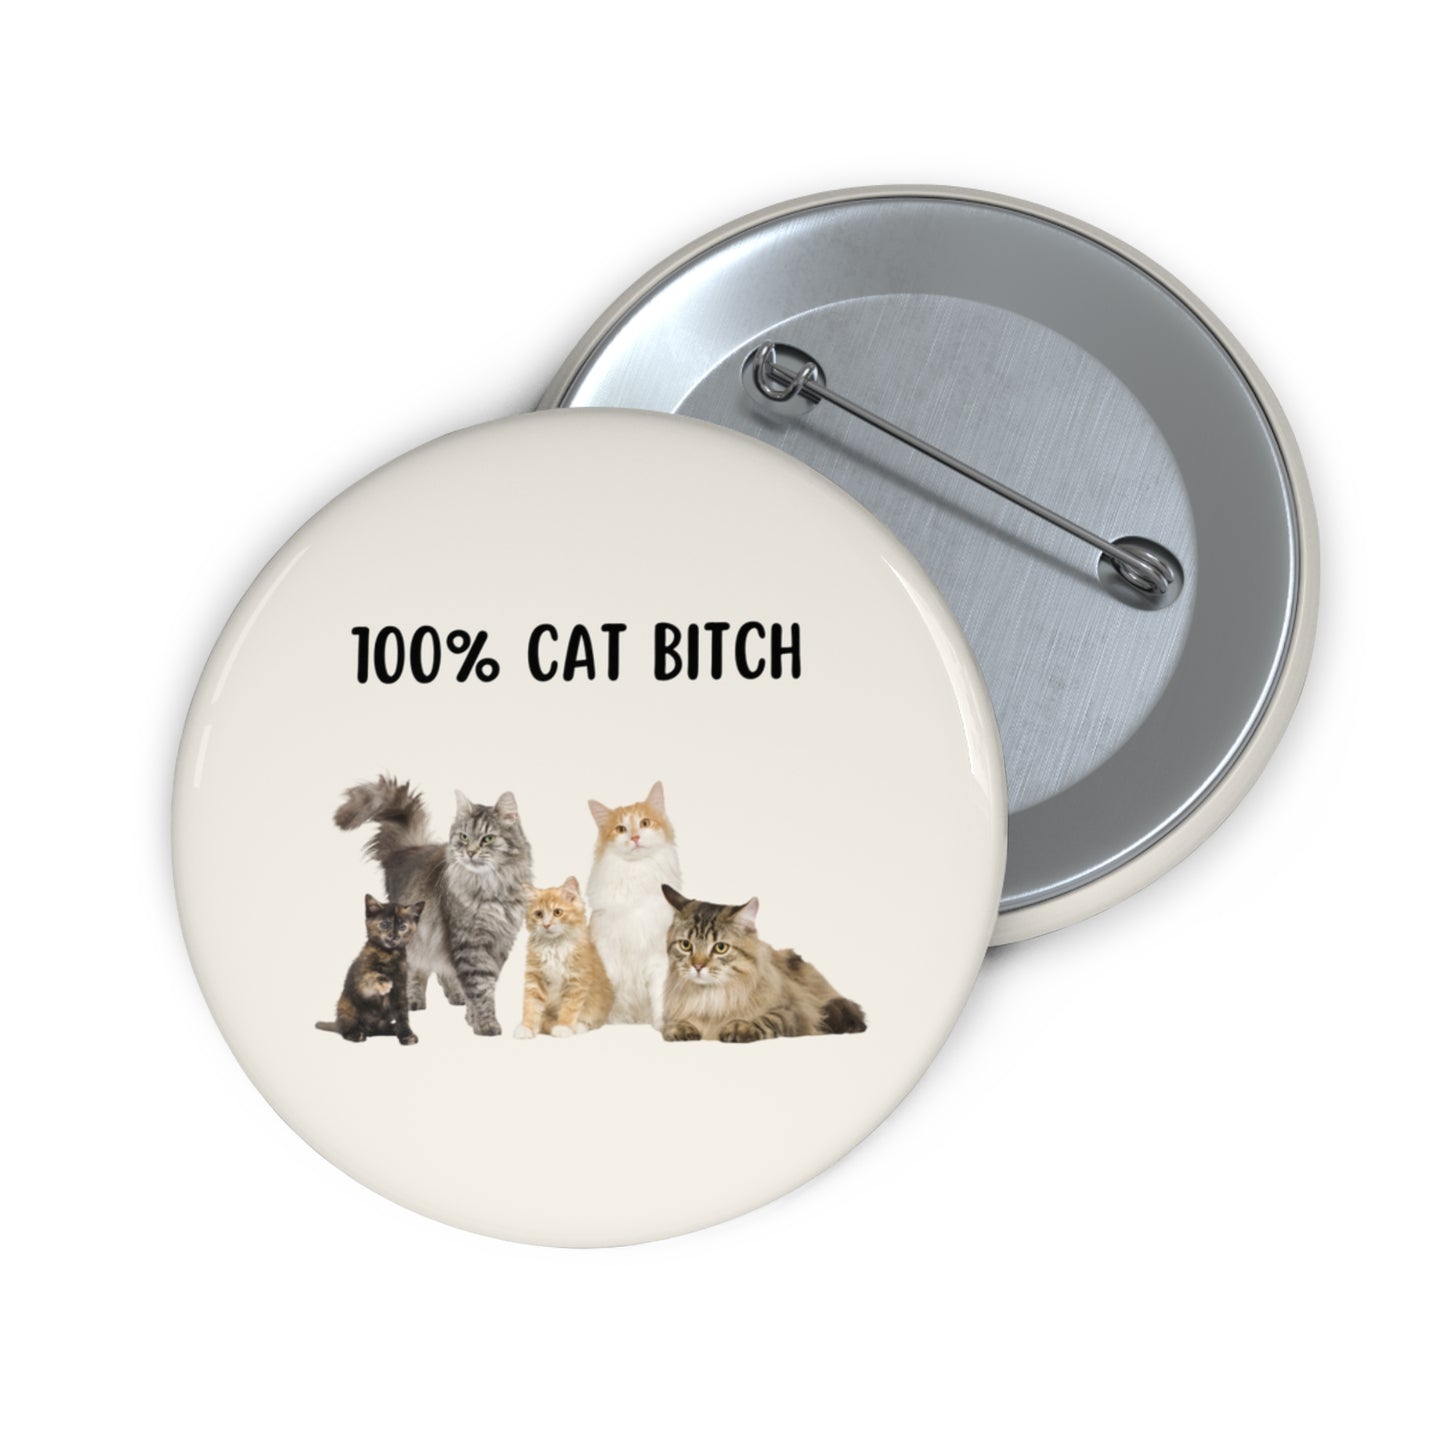 100% Cat B*tch Pin, Funny Cat Pinback Button, Funny Cat Pin Brooch Badge, Cat Mom Gift, Pin Bag Accessories